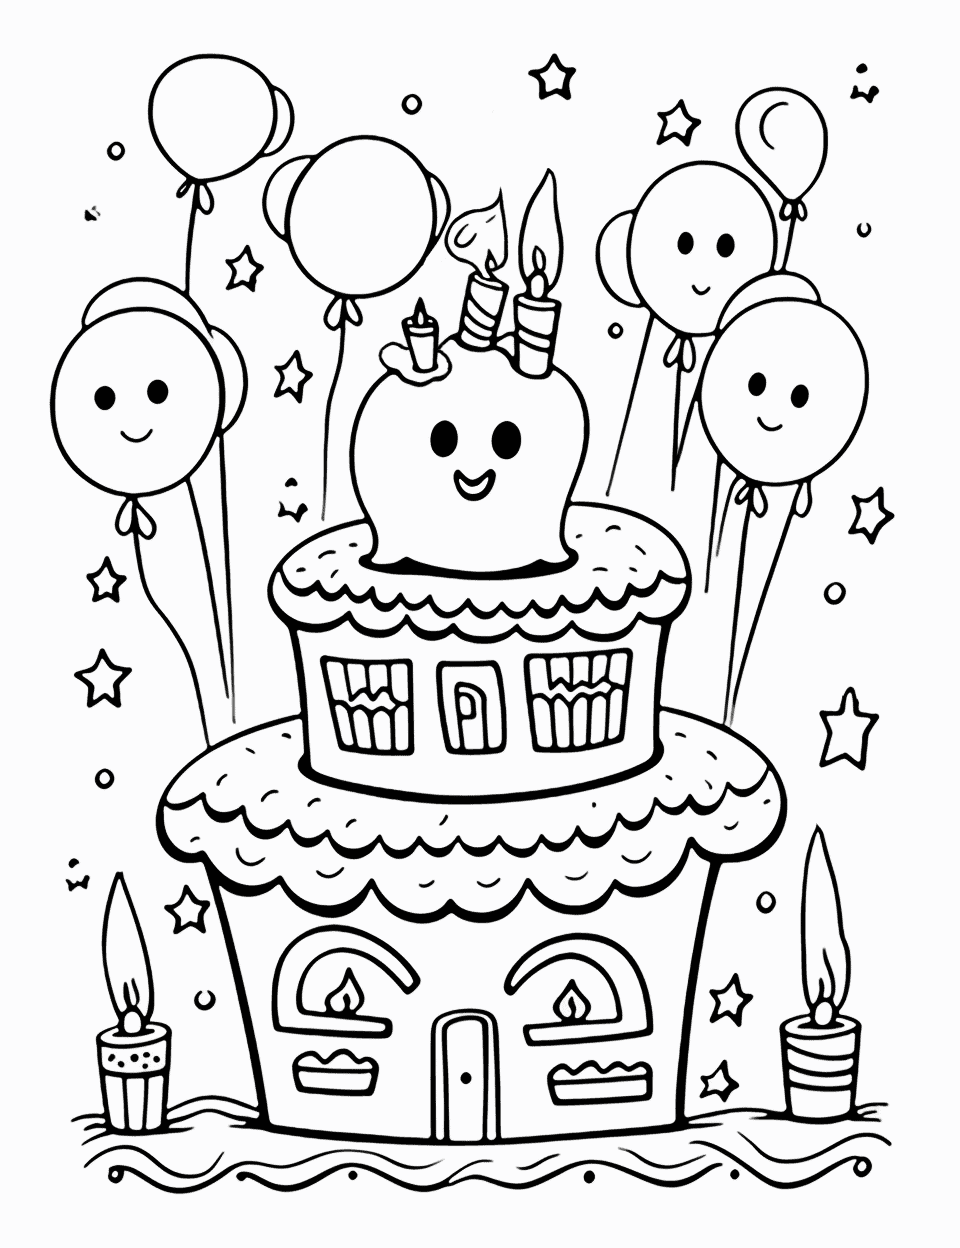 Spooky Ghost's Birthday Happy Coloring Page - A friendly ghost celebrating its birthday in a haunted house.